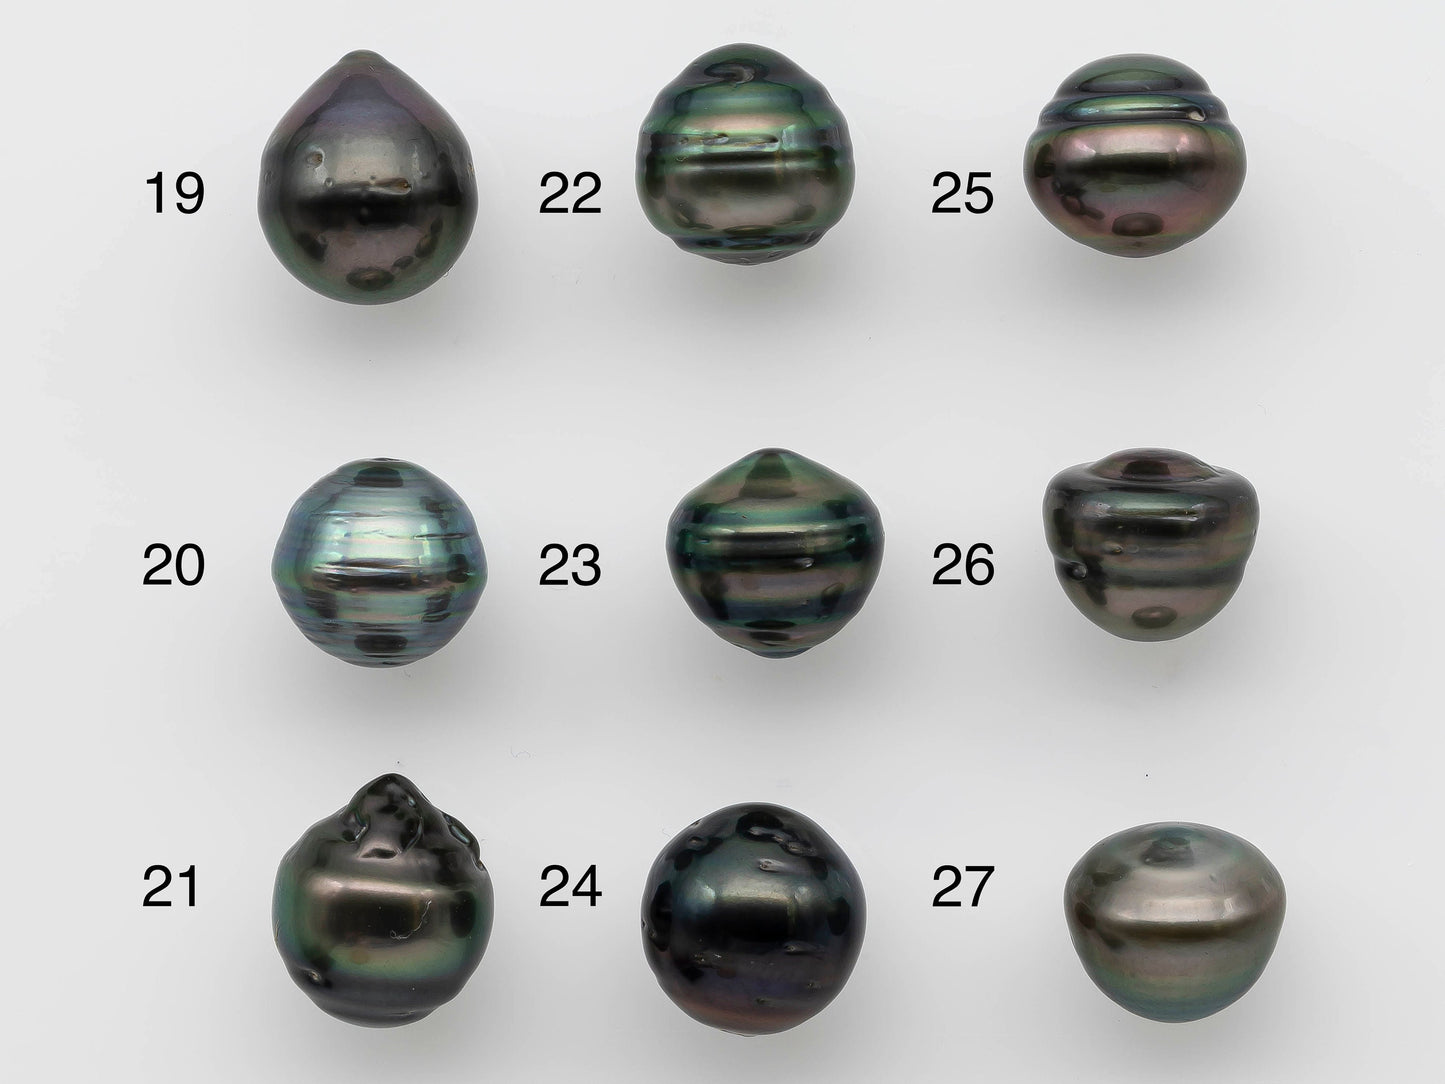 14-15mm Huge Size Single Piece Tahitian Pearl Loose Undrilled Drops in Natural Color with High Luster for Jewelry Making, SKU # 1263TH